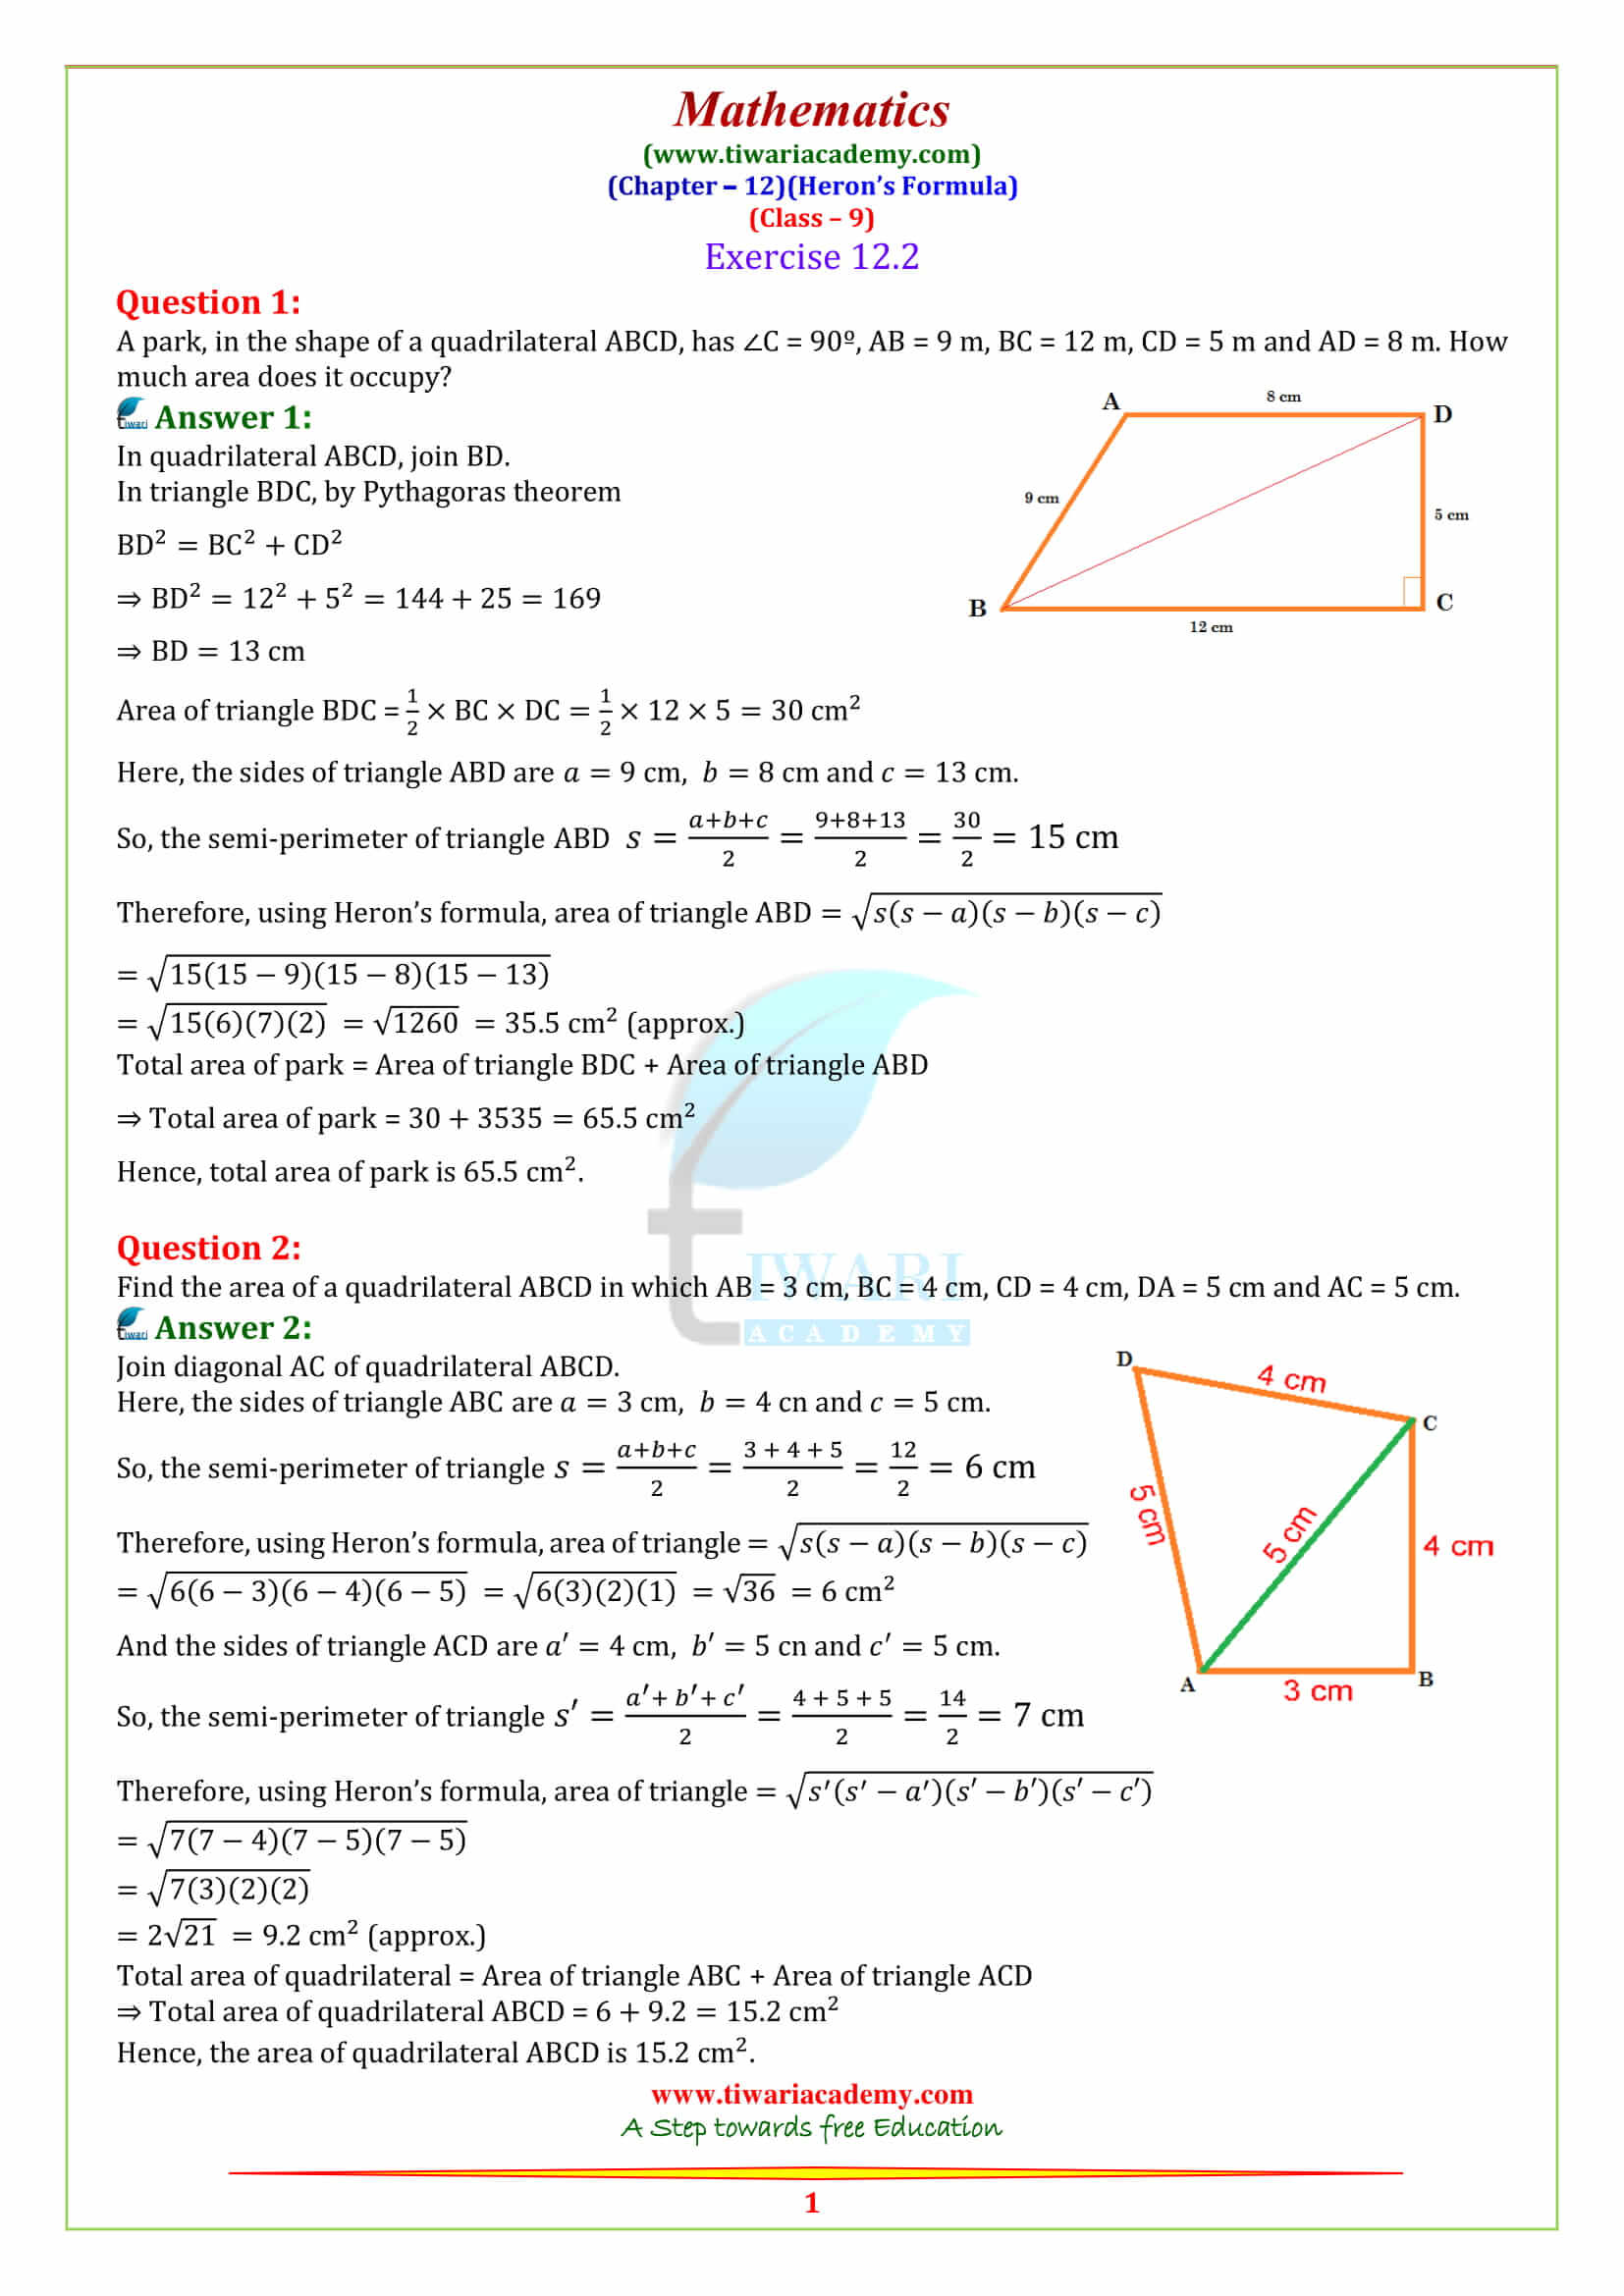 NCERT Solutions for Class 9 Maths Chapter 12 Heron's Formula Exercise 12.2